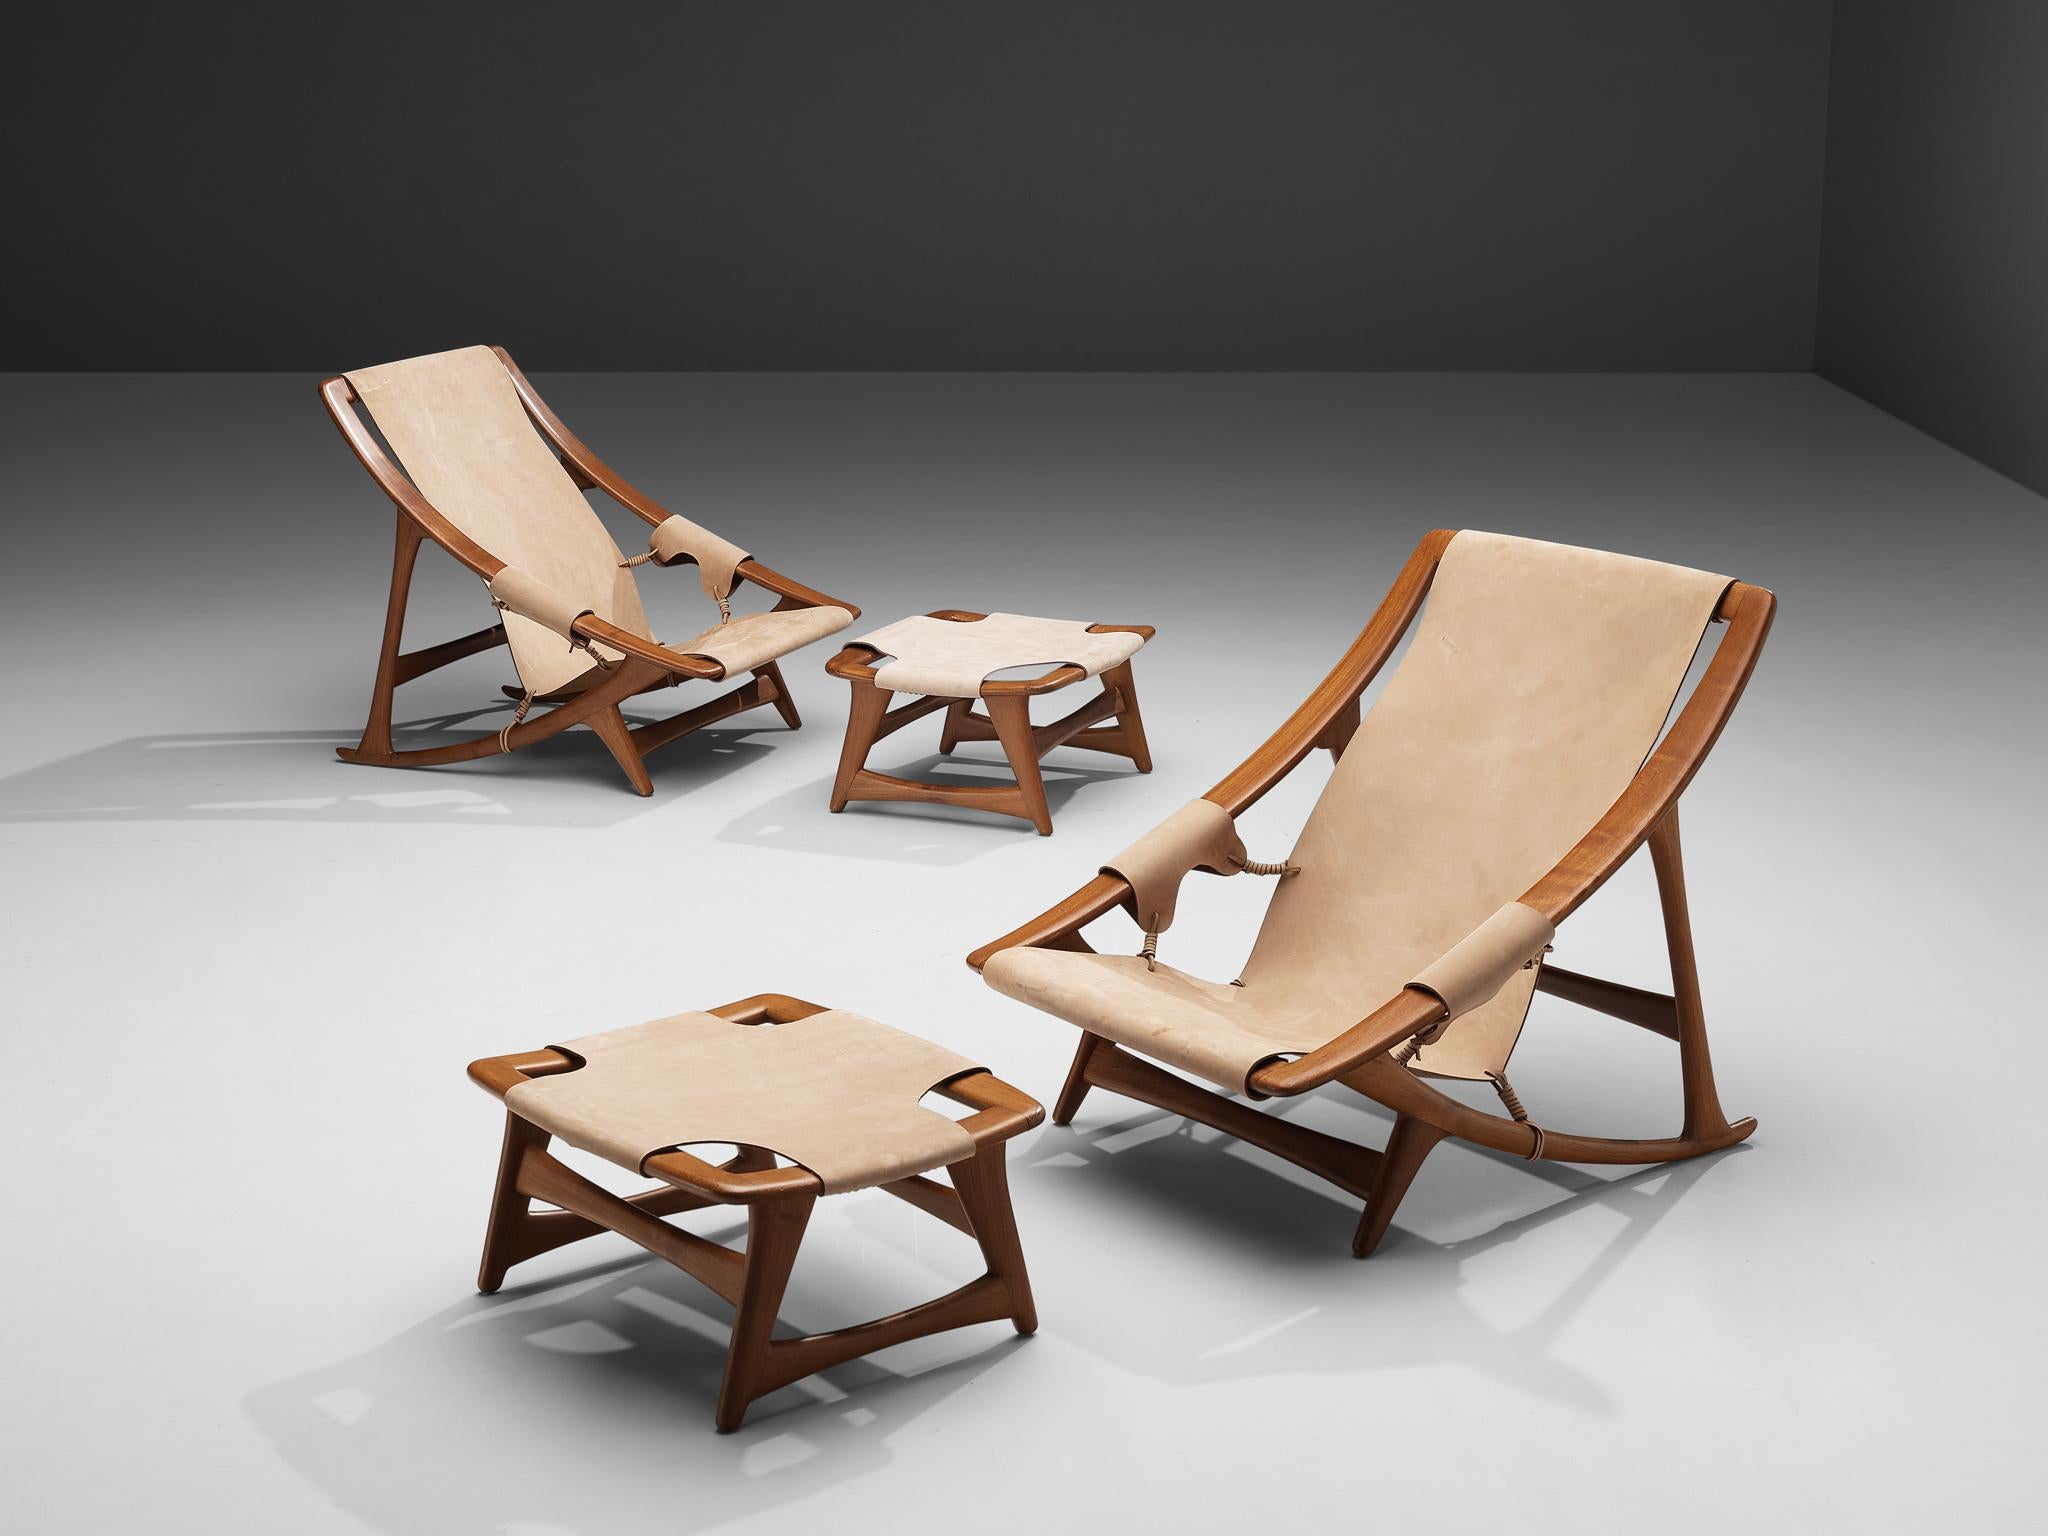 W.D. Andersag, pair lounge chairs with ottoman, teak, leather, Italy, 1960s

These chairs are very dynamic due its design and shapes. The teak frame shows beautiful lines. The frame and construction reminds of the sturdy hunting chairs. Thick